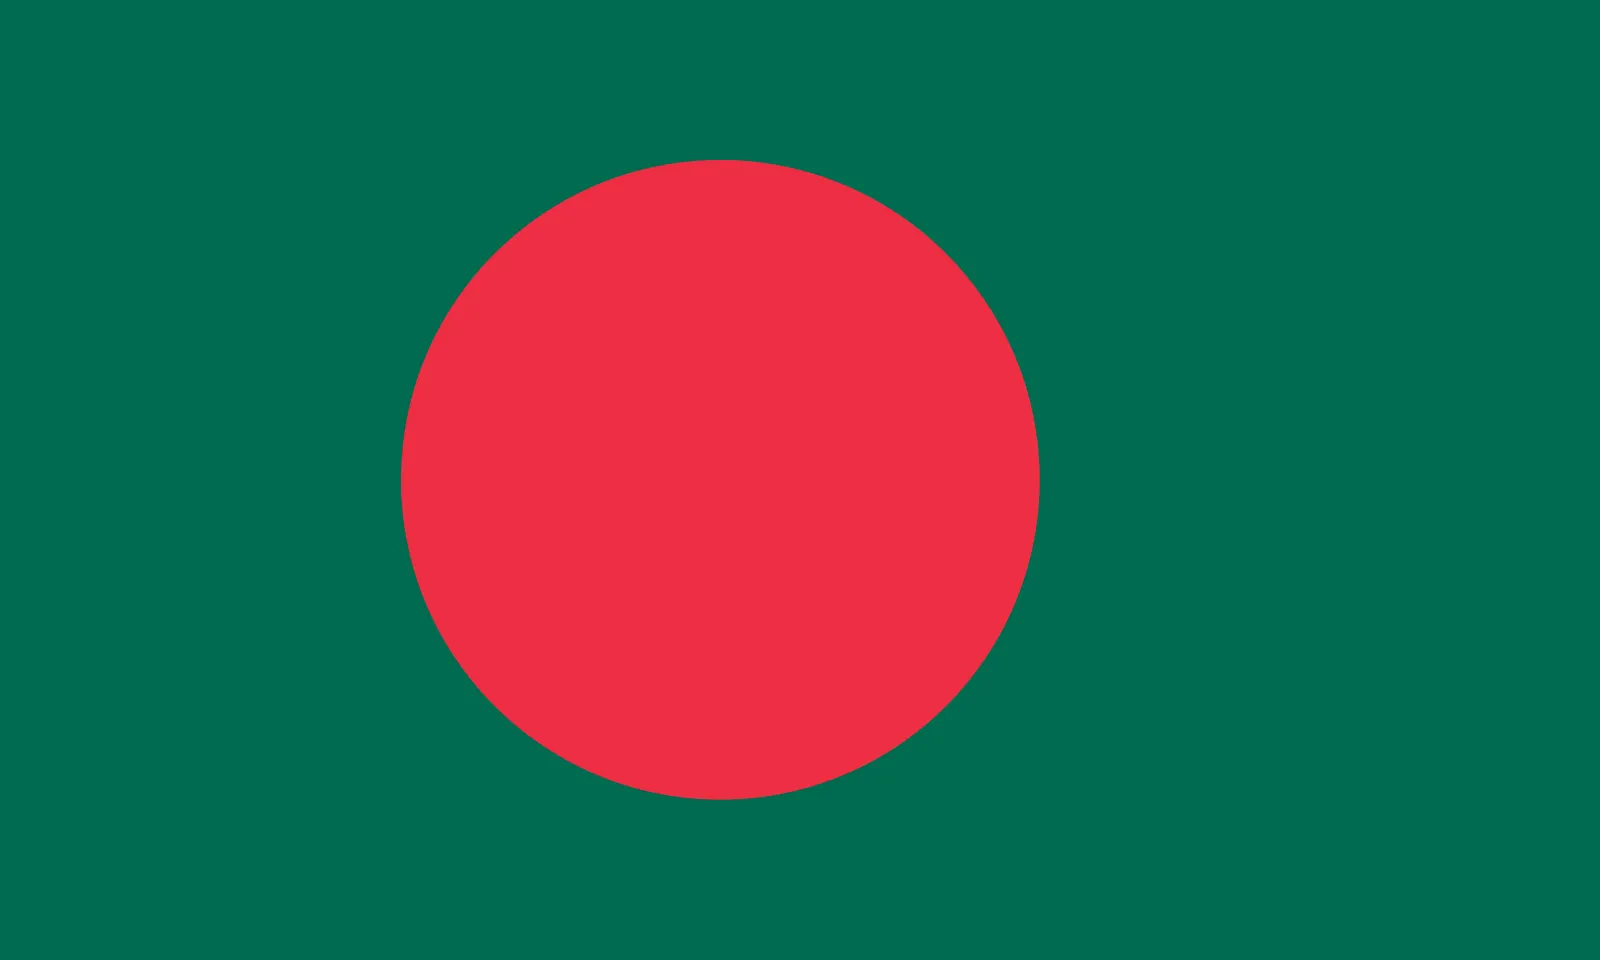 Bangladesh announces discovery of new gas field